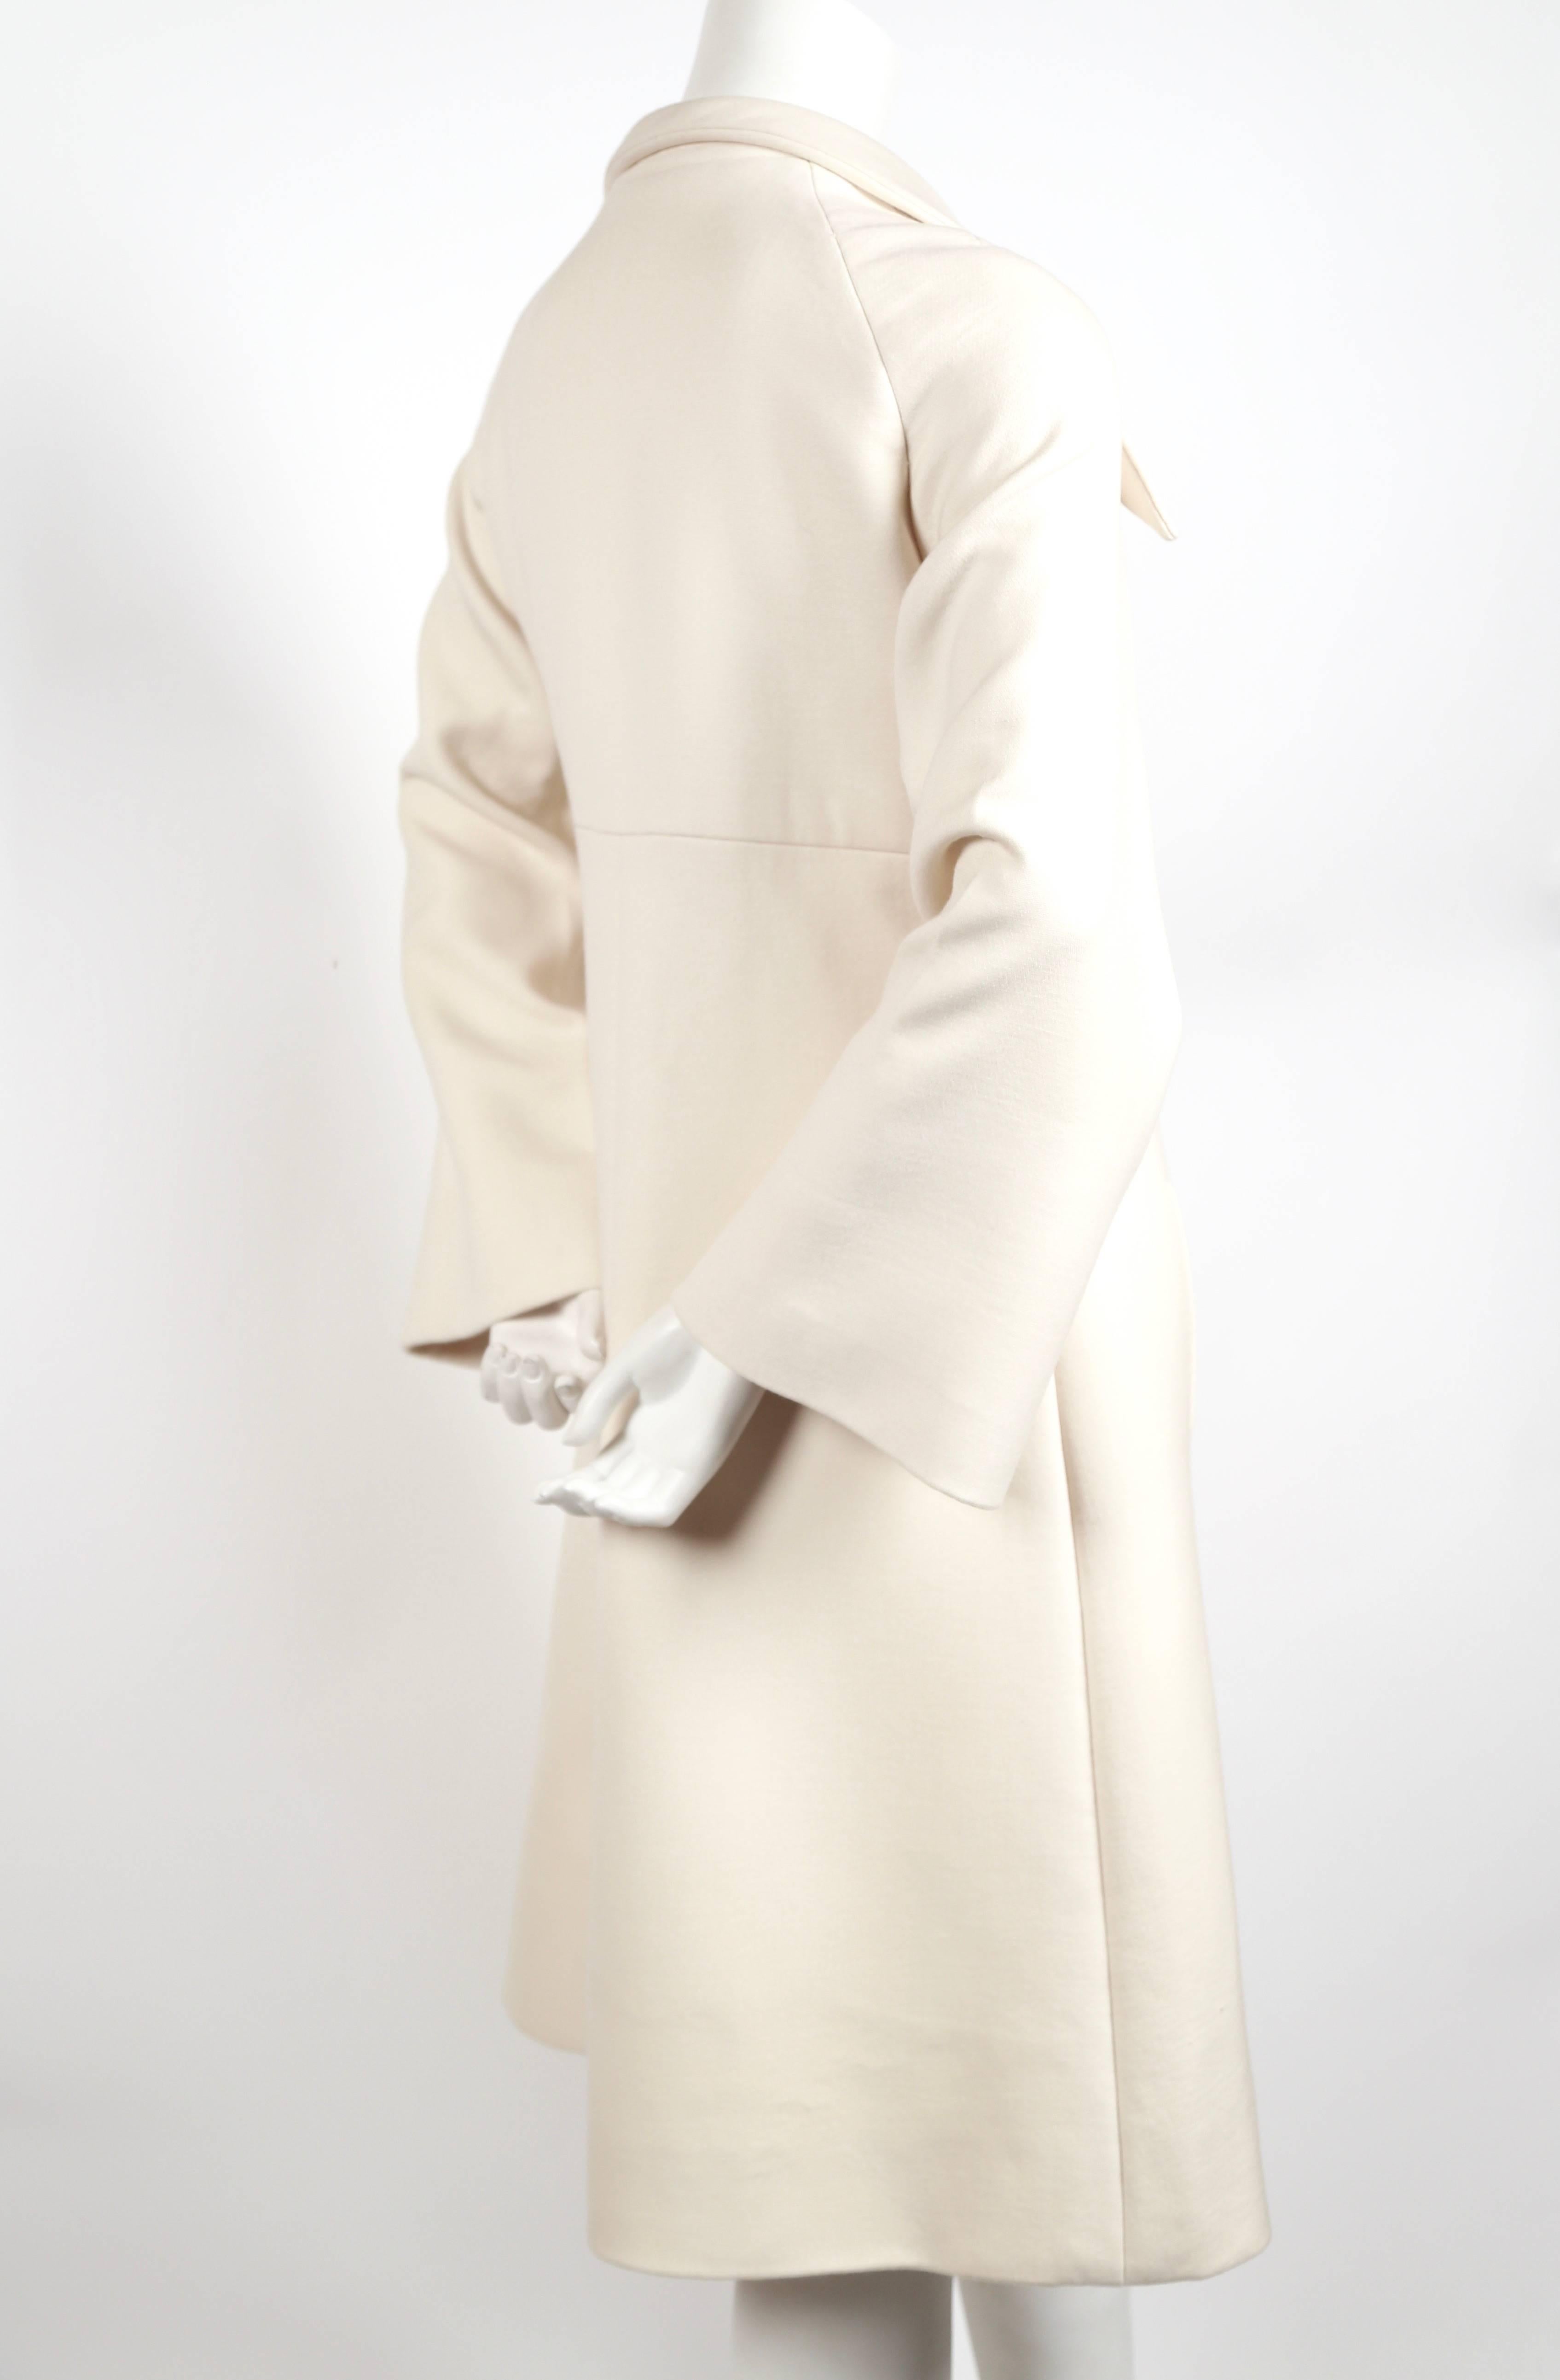 Cream wool haute couture coat with large collar and wide sleeves designed by Pierre Cardin dating to the 1970's. Best fits a US 2-6 (coat was not clipped on a size 2 mannequin). Approximate measurements: bust 36